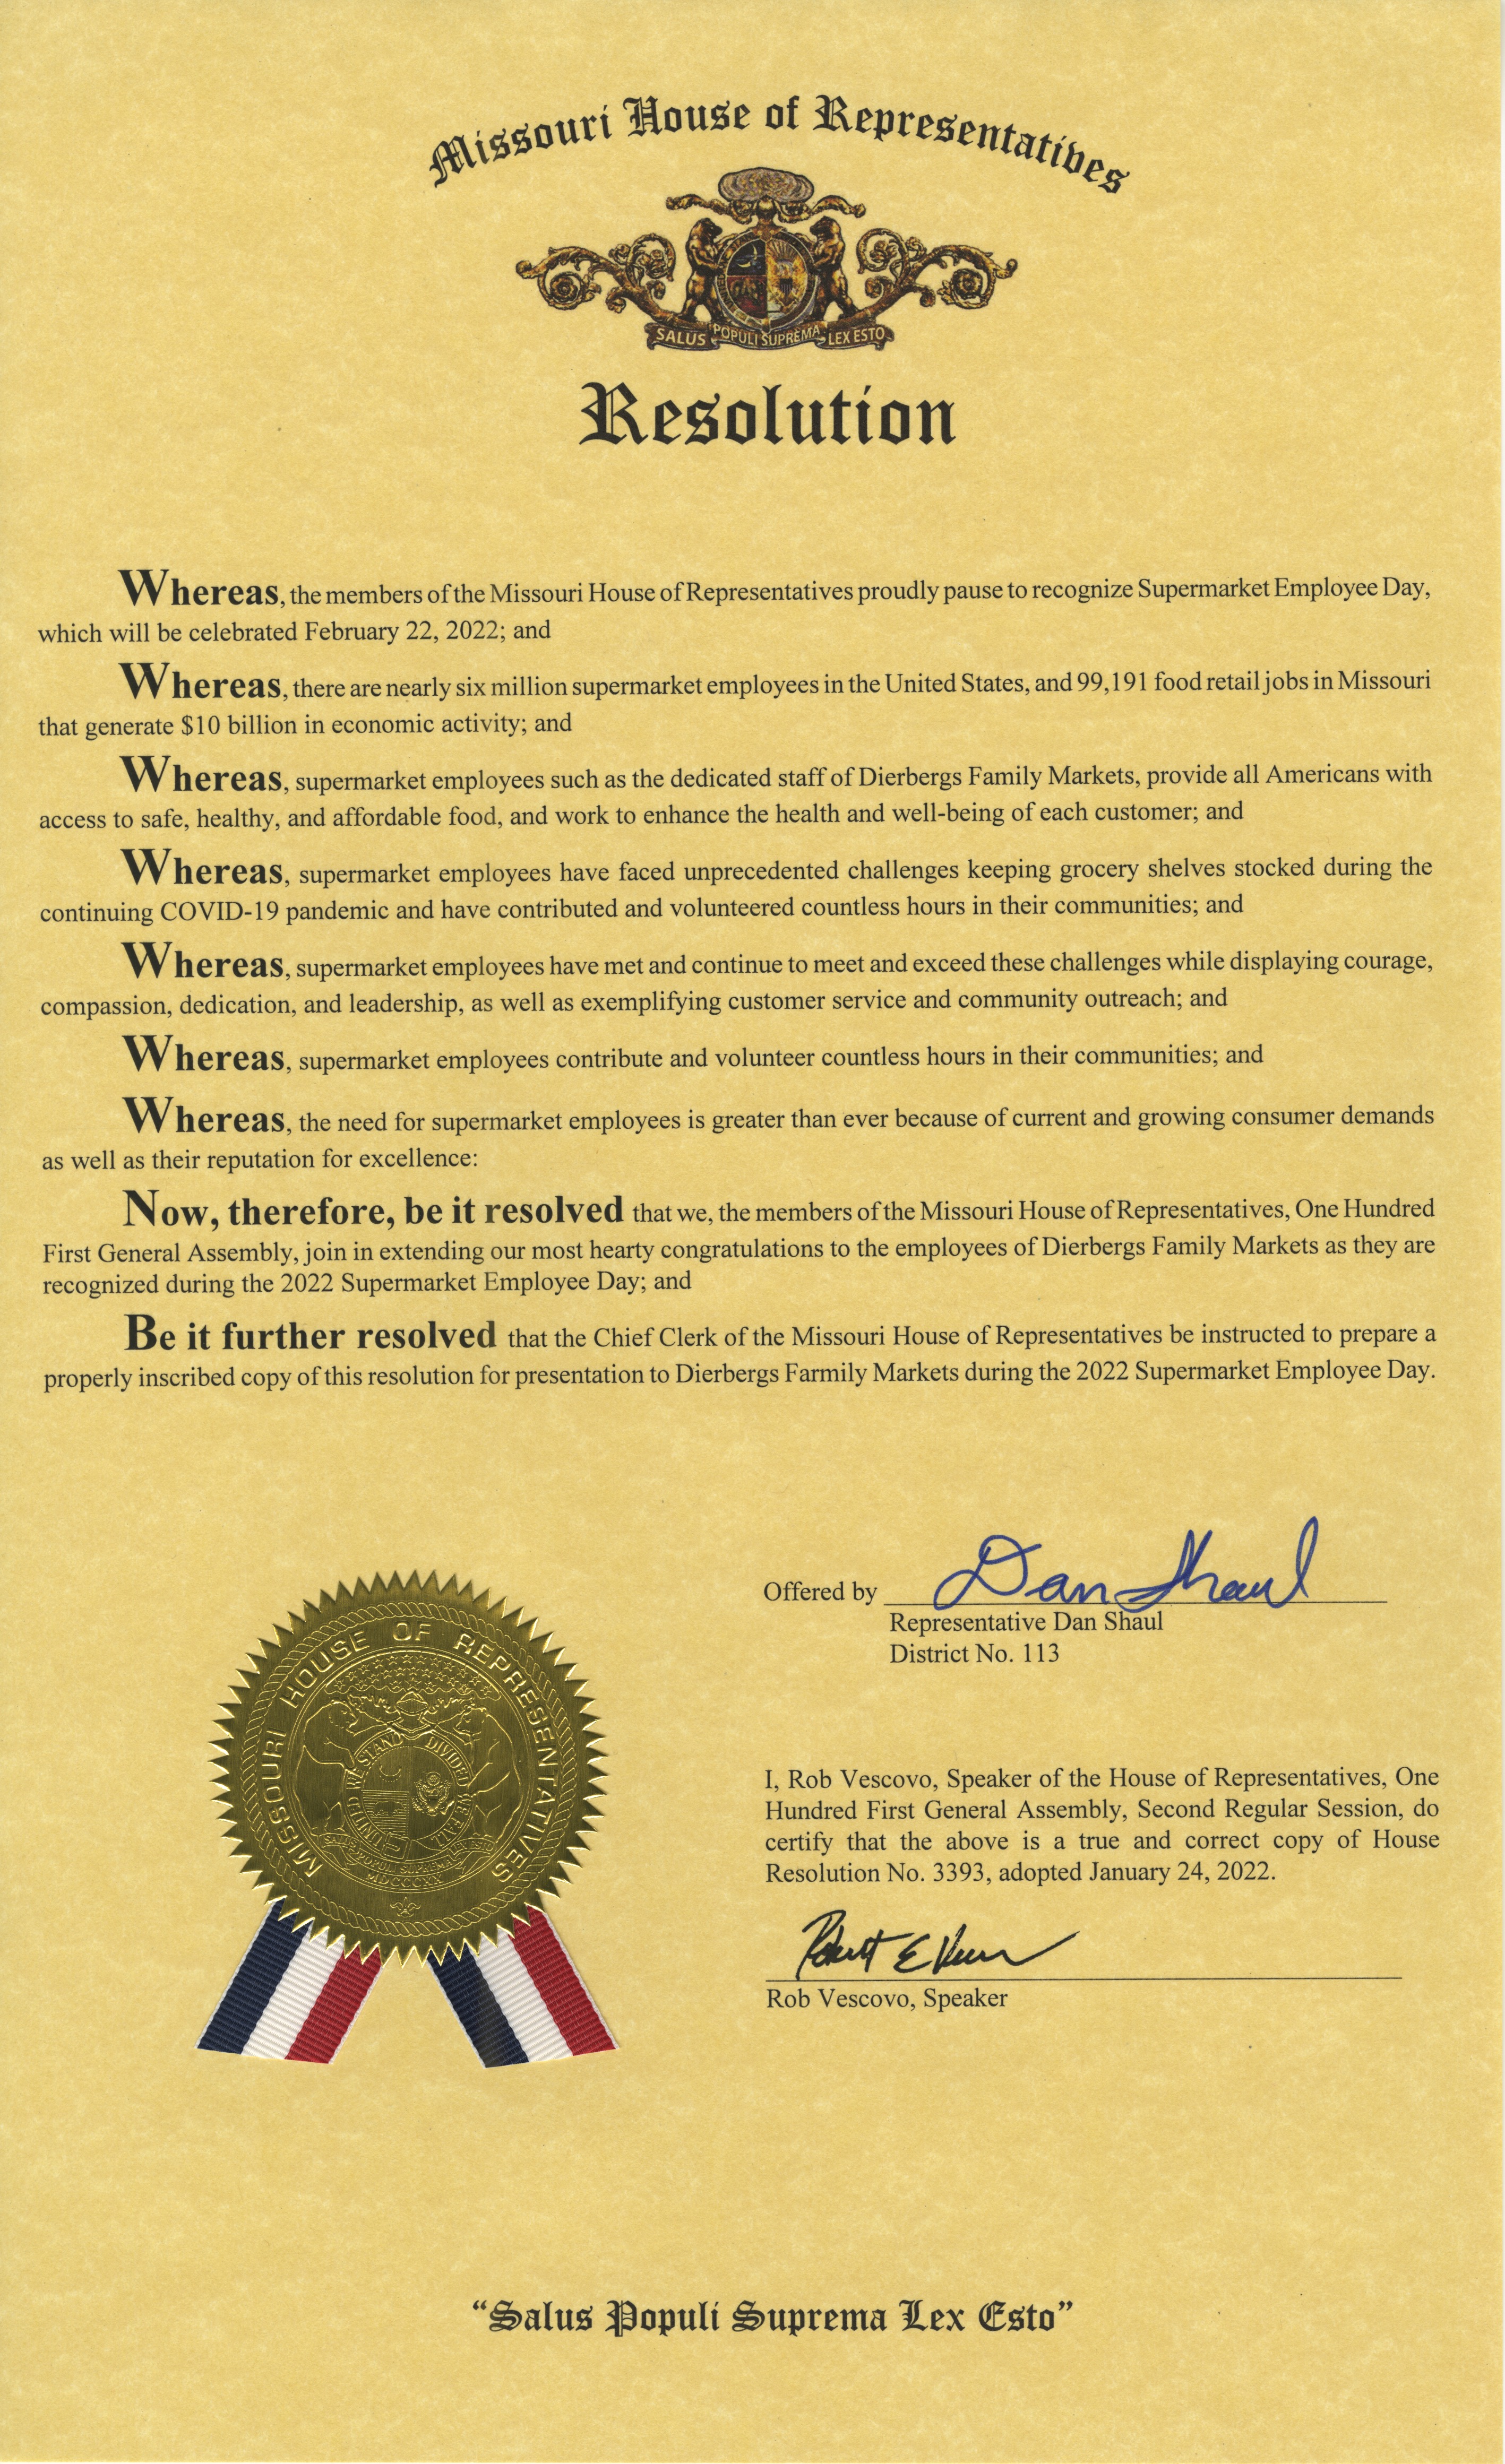 A scanned copy of the Supermarket Employee Day Missouri House of Representatives Resolution given to Dierbergs.